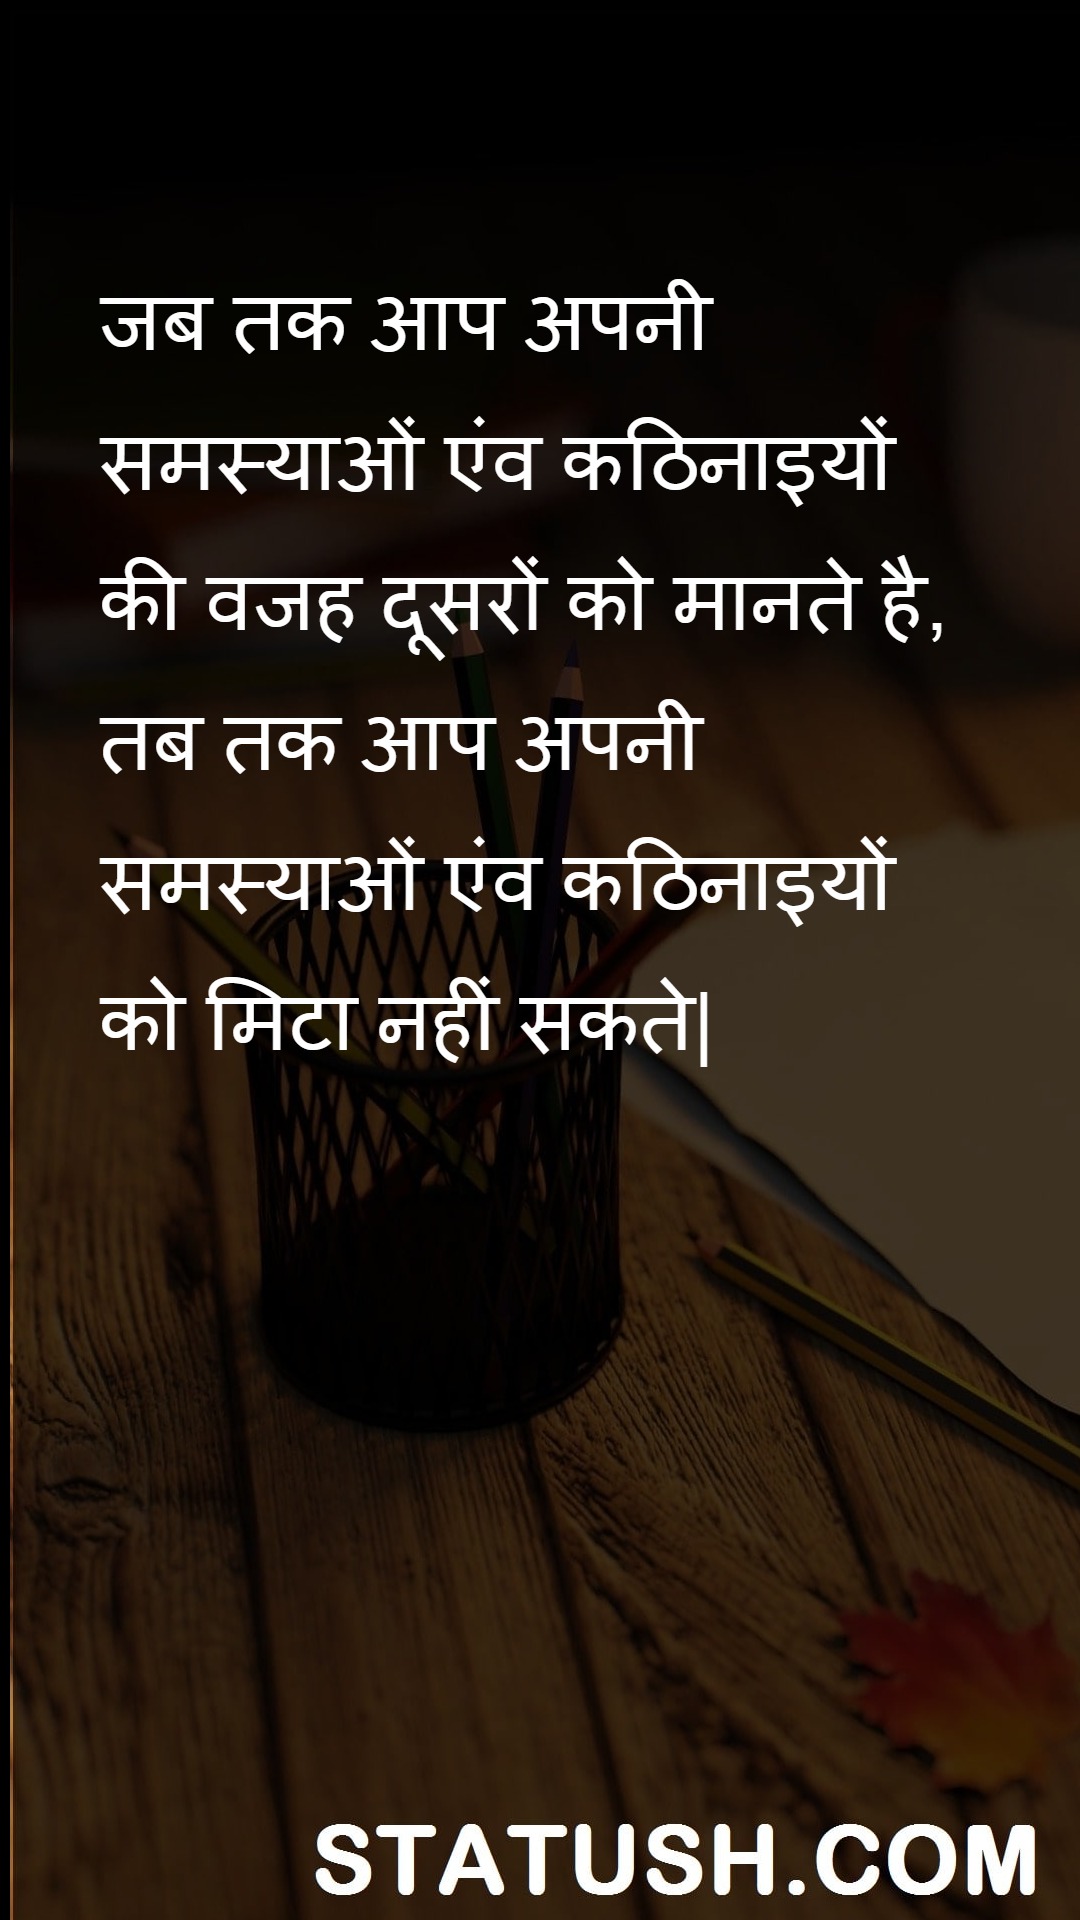 As long as you believe others - Hindi Quotes at statush.com